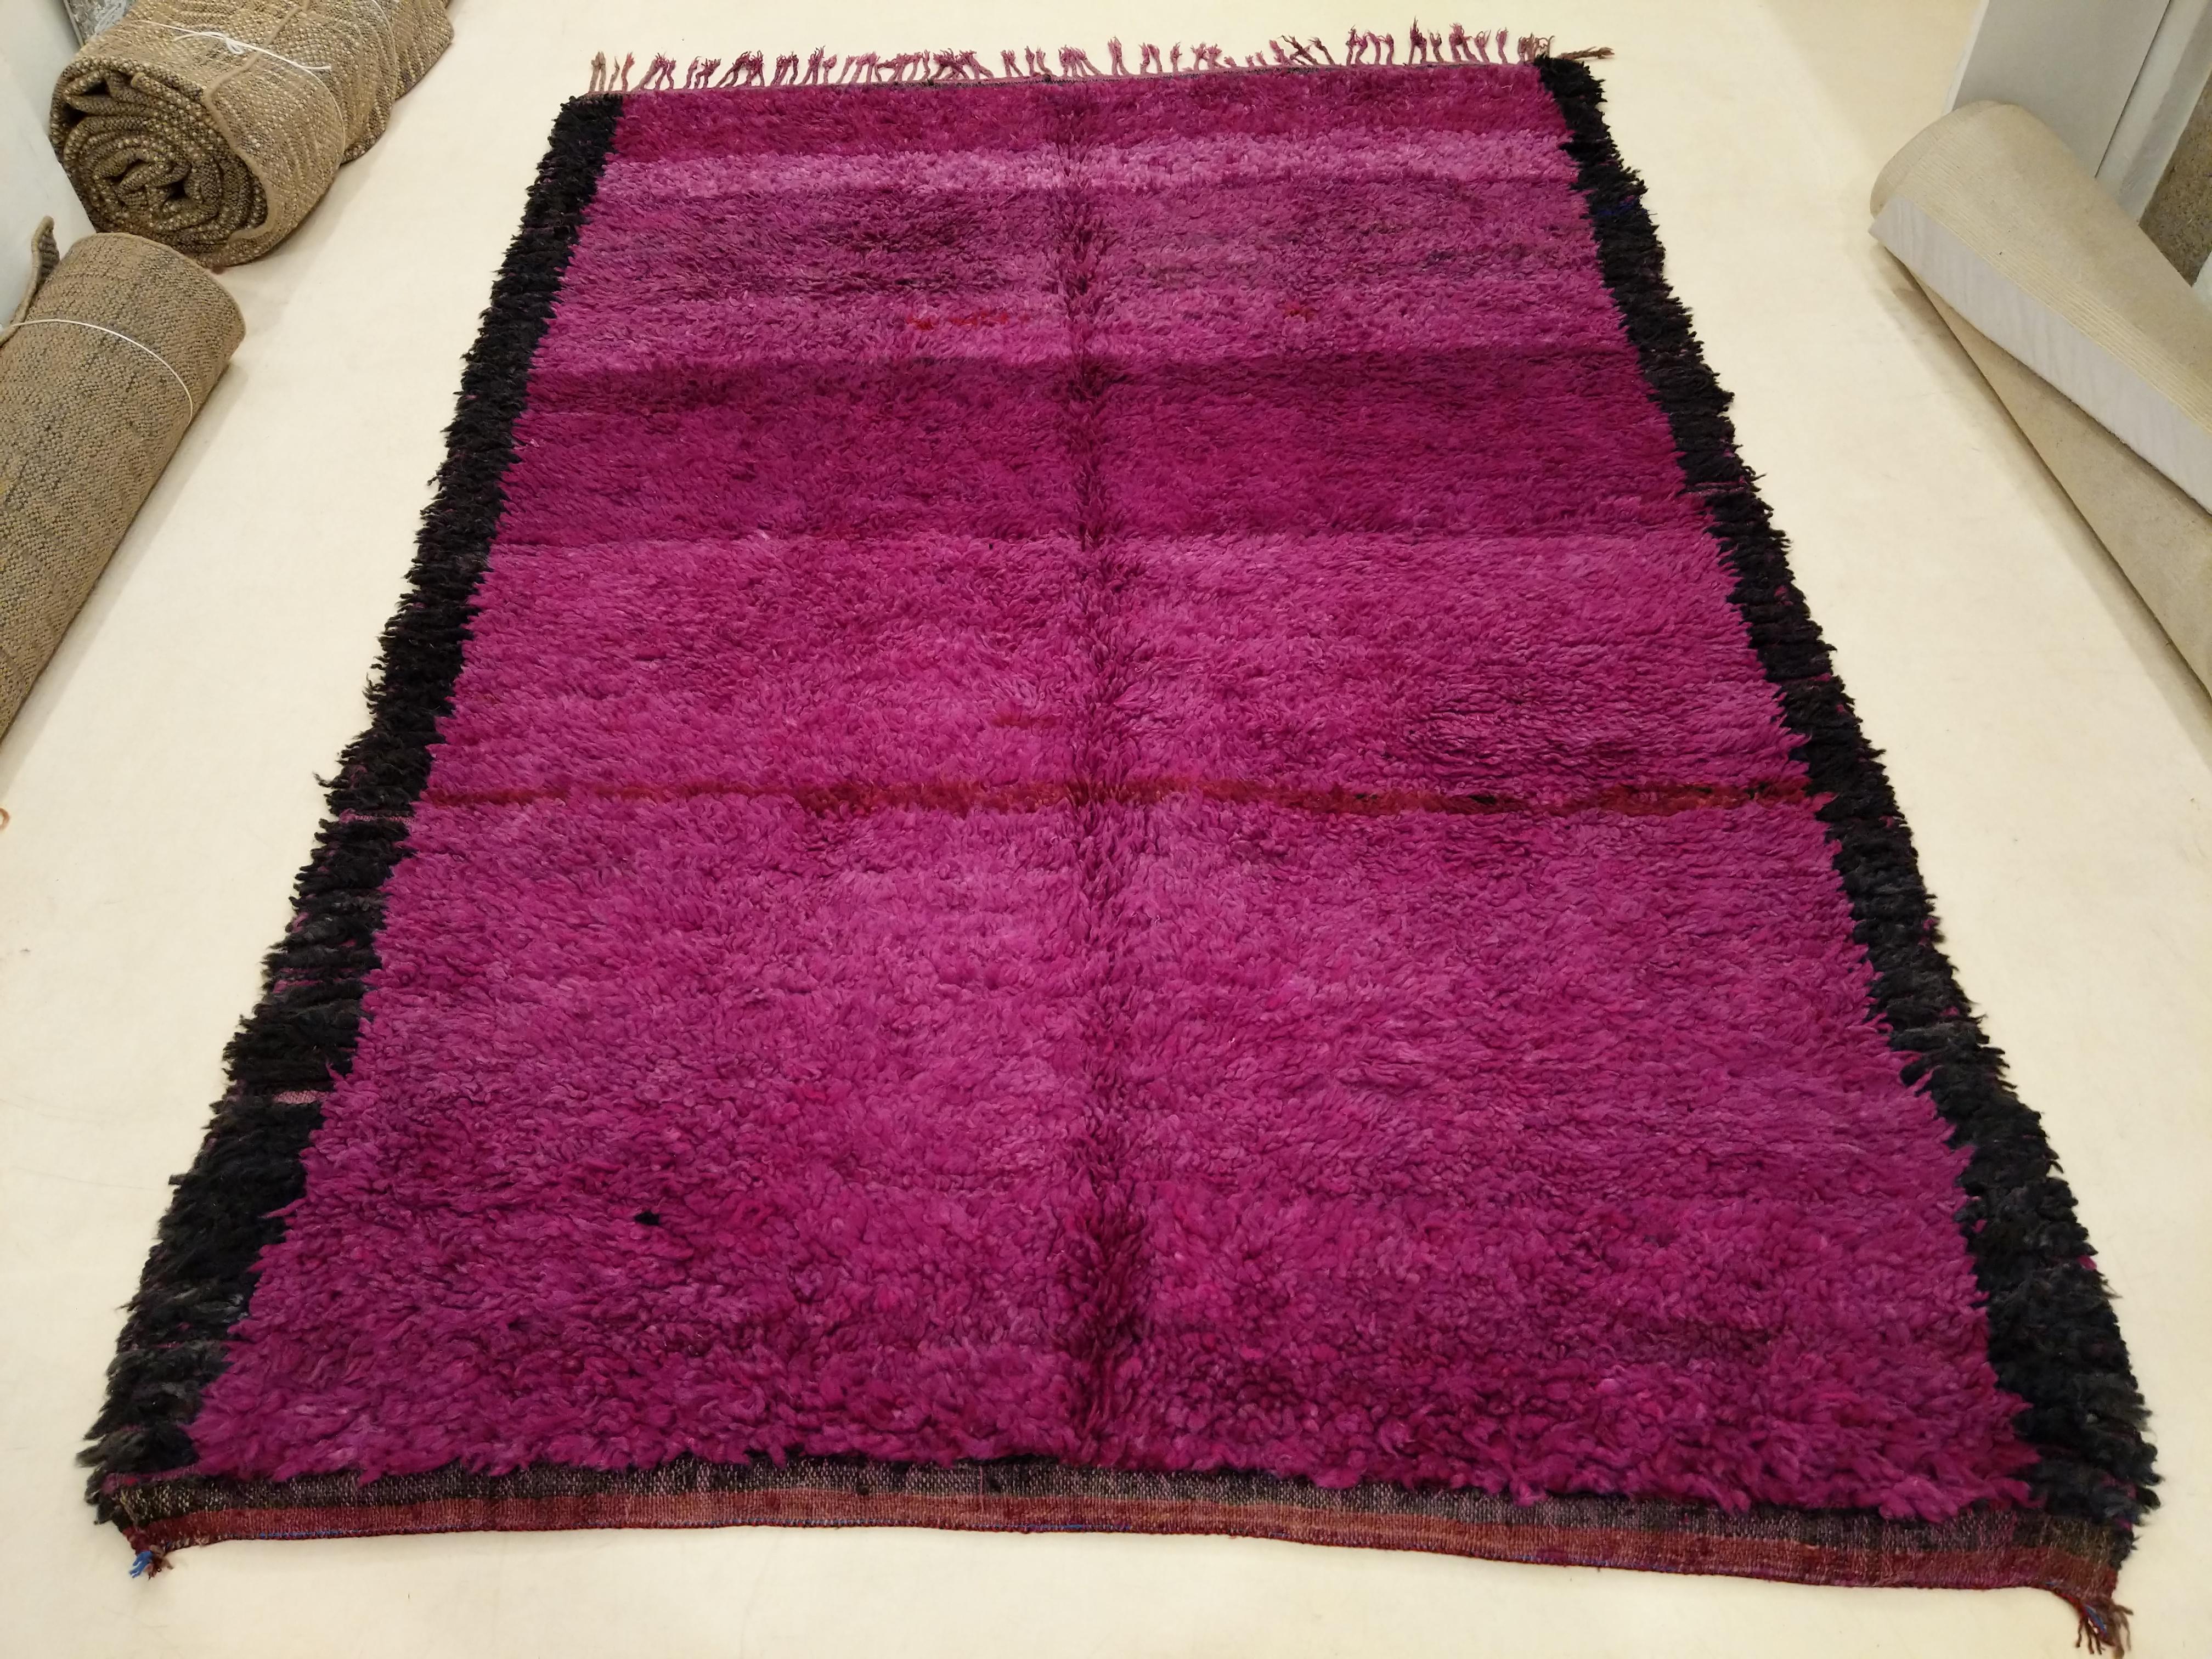 Minimalist Middle Atlas Moroccan Berber Purple Rug In Excellent Condition For Sale In Milan, IT